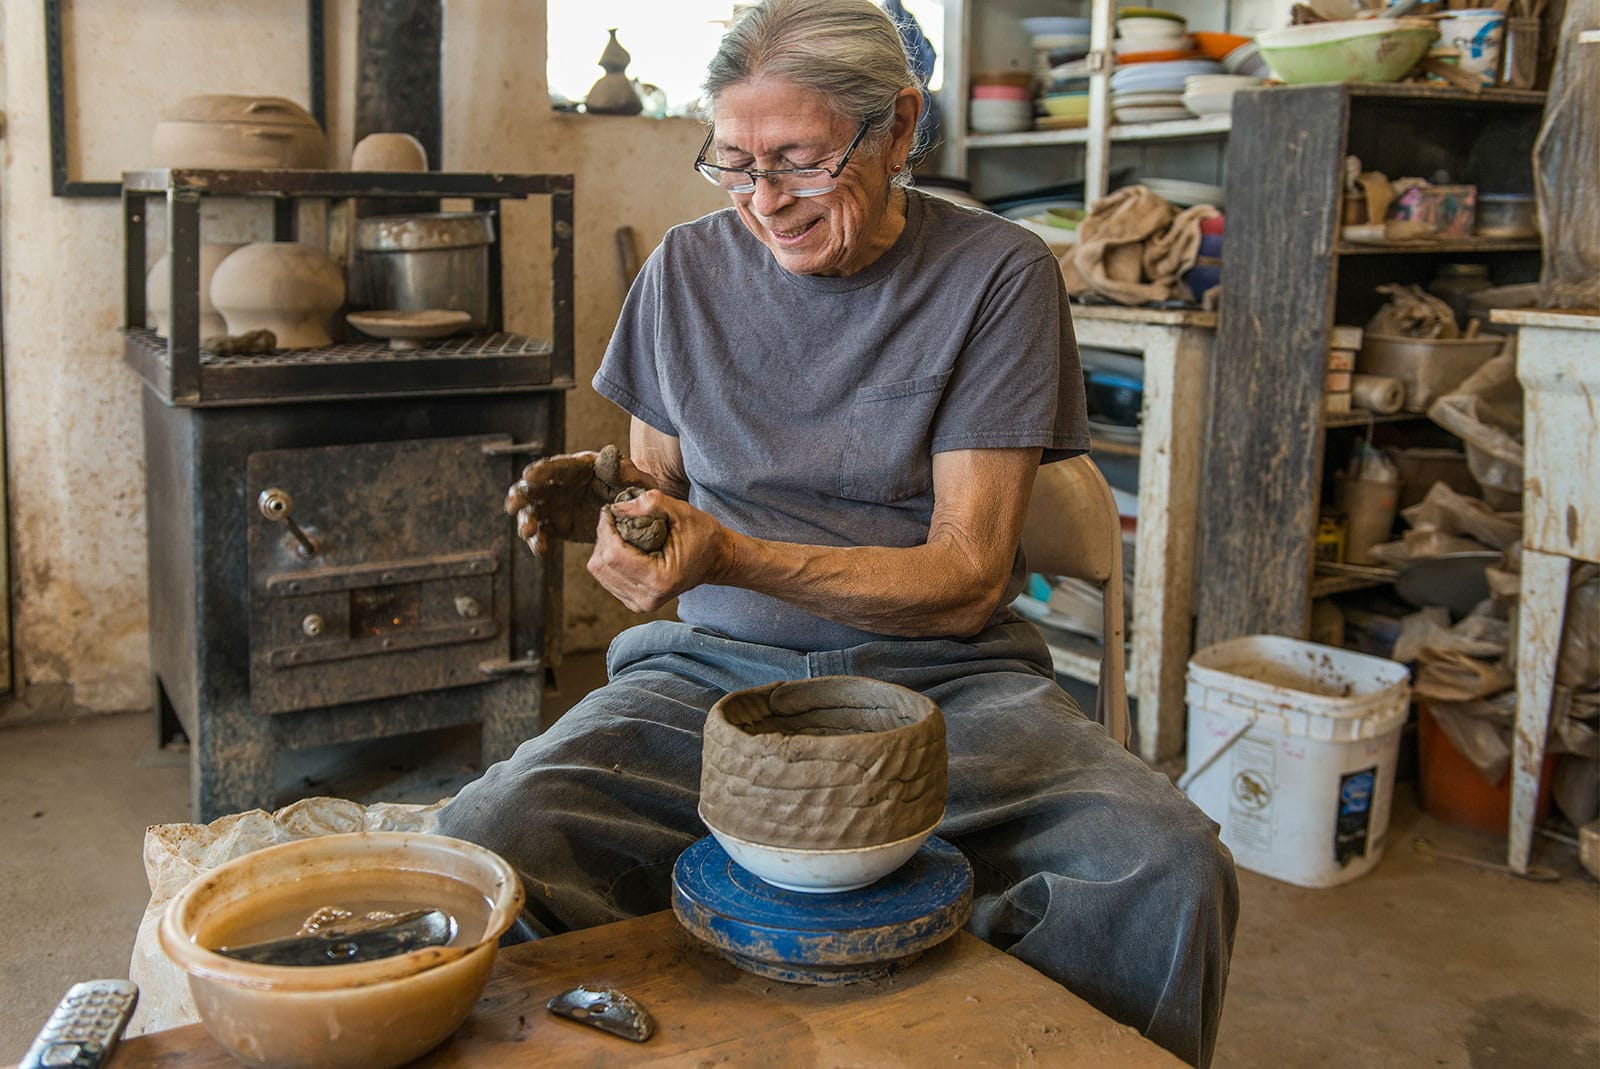 Most local crafters make pottery from oven-baked clay but have you